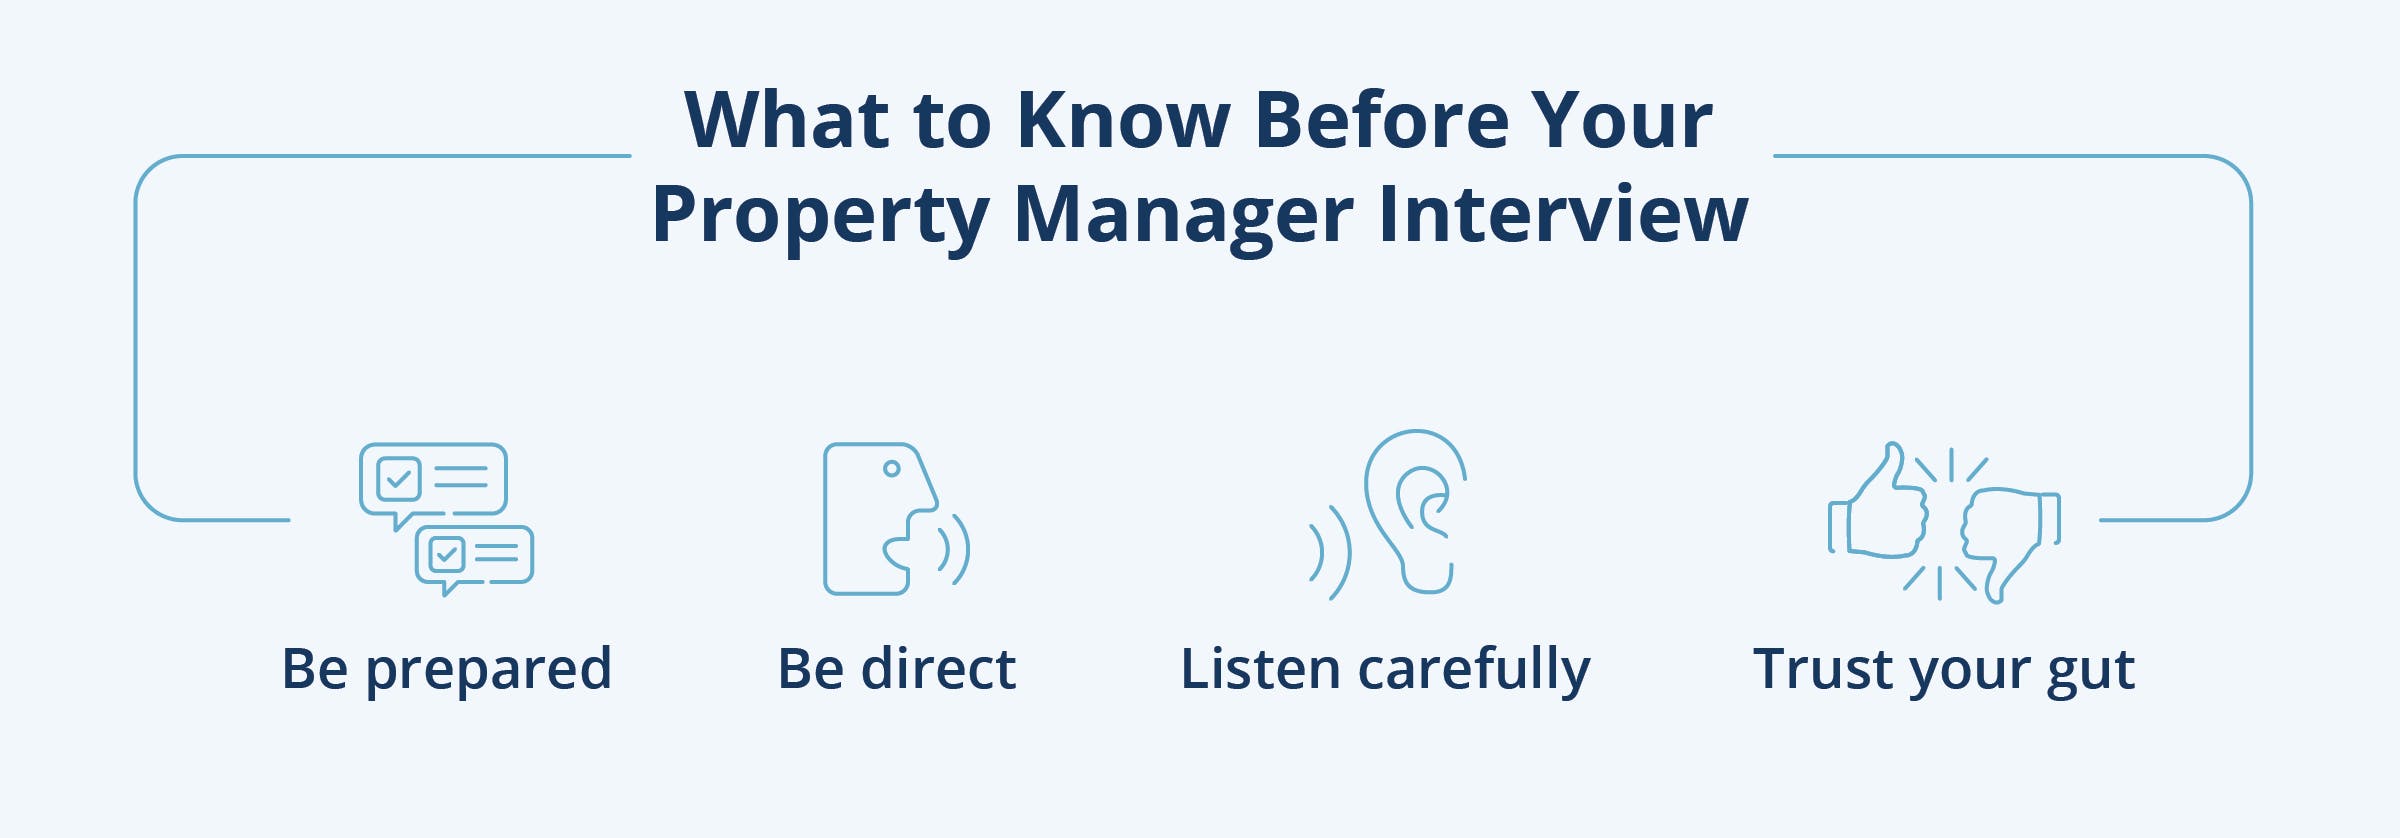 property management interview questions inline